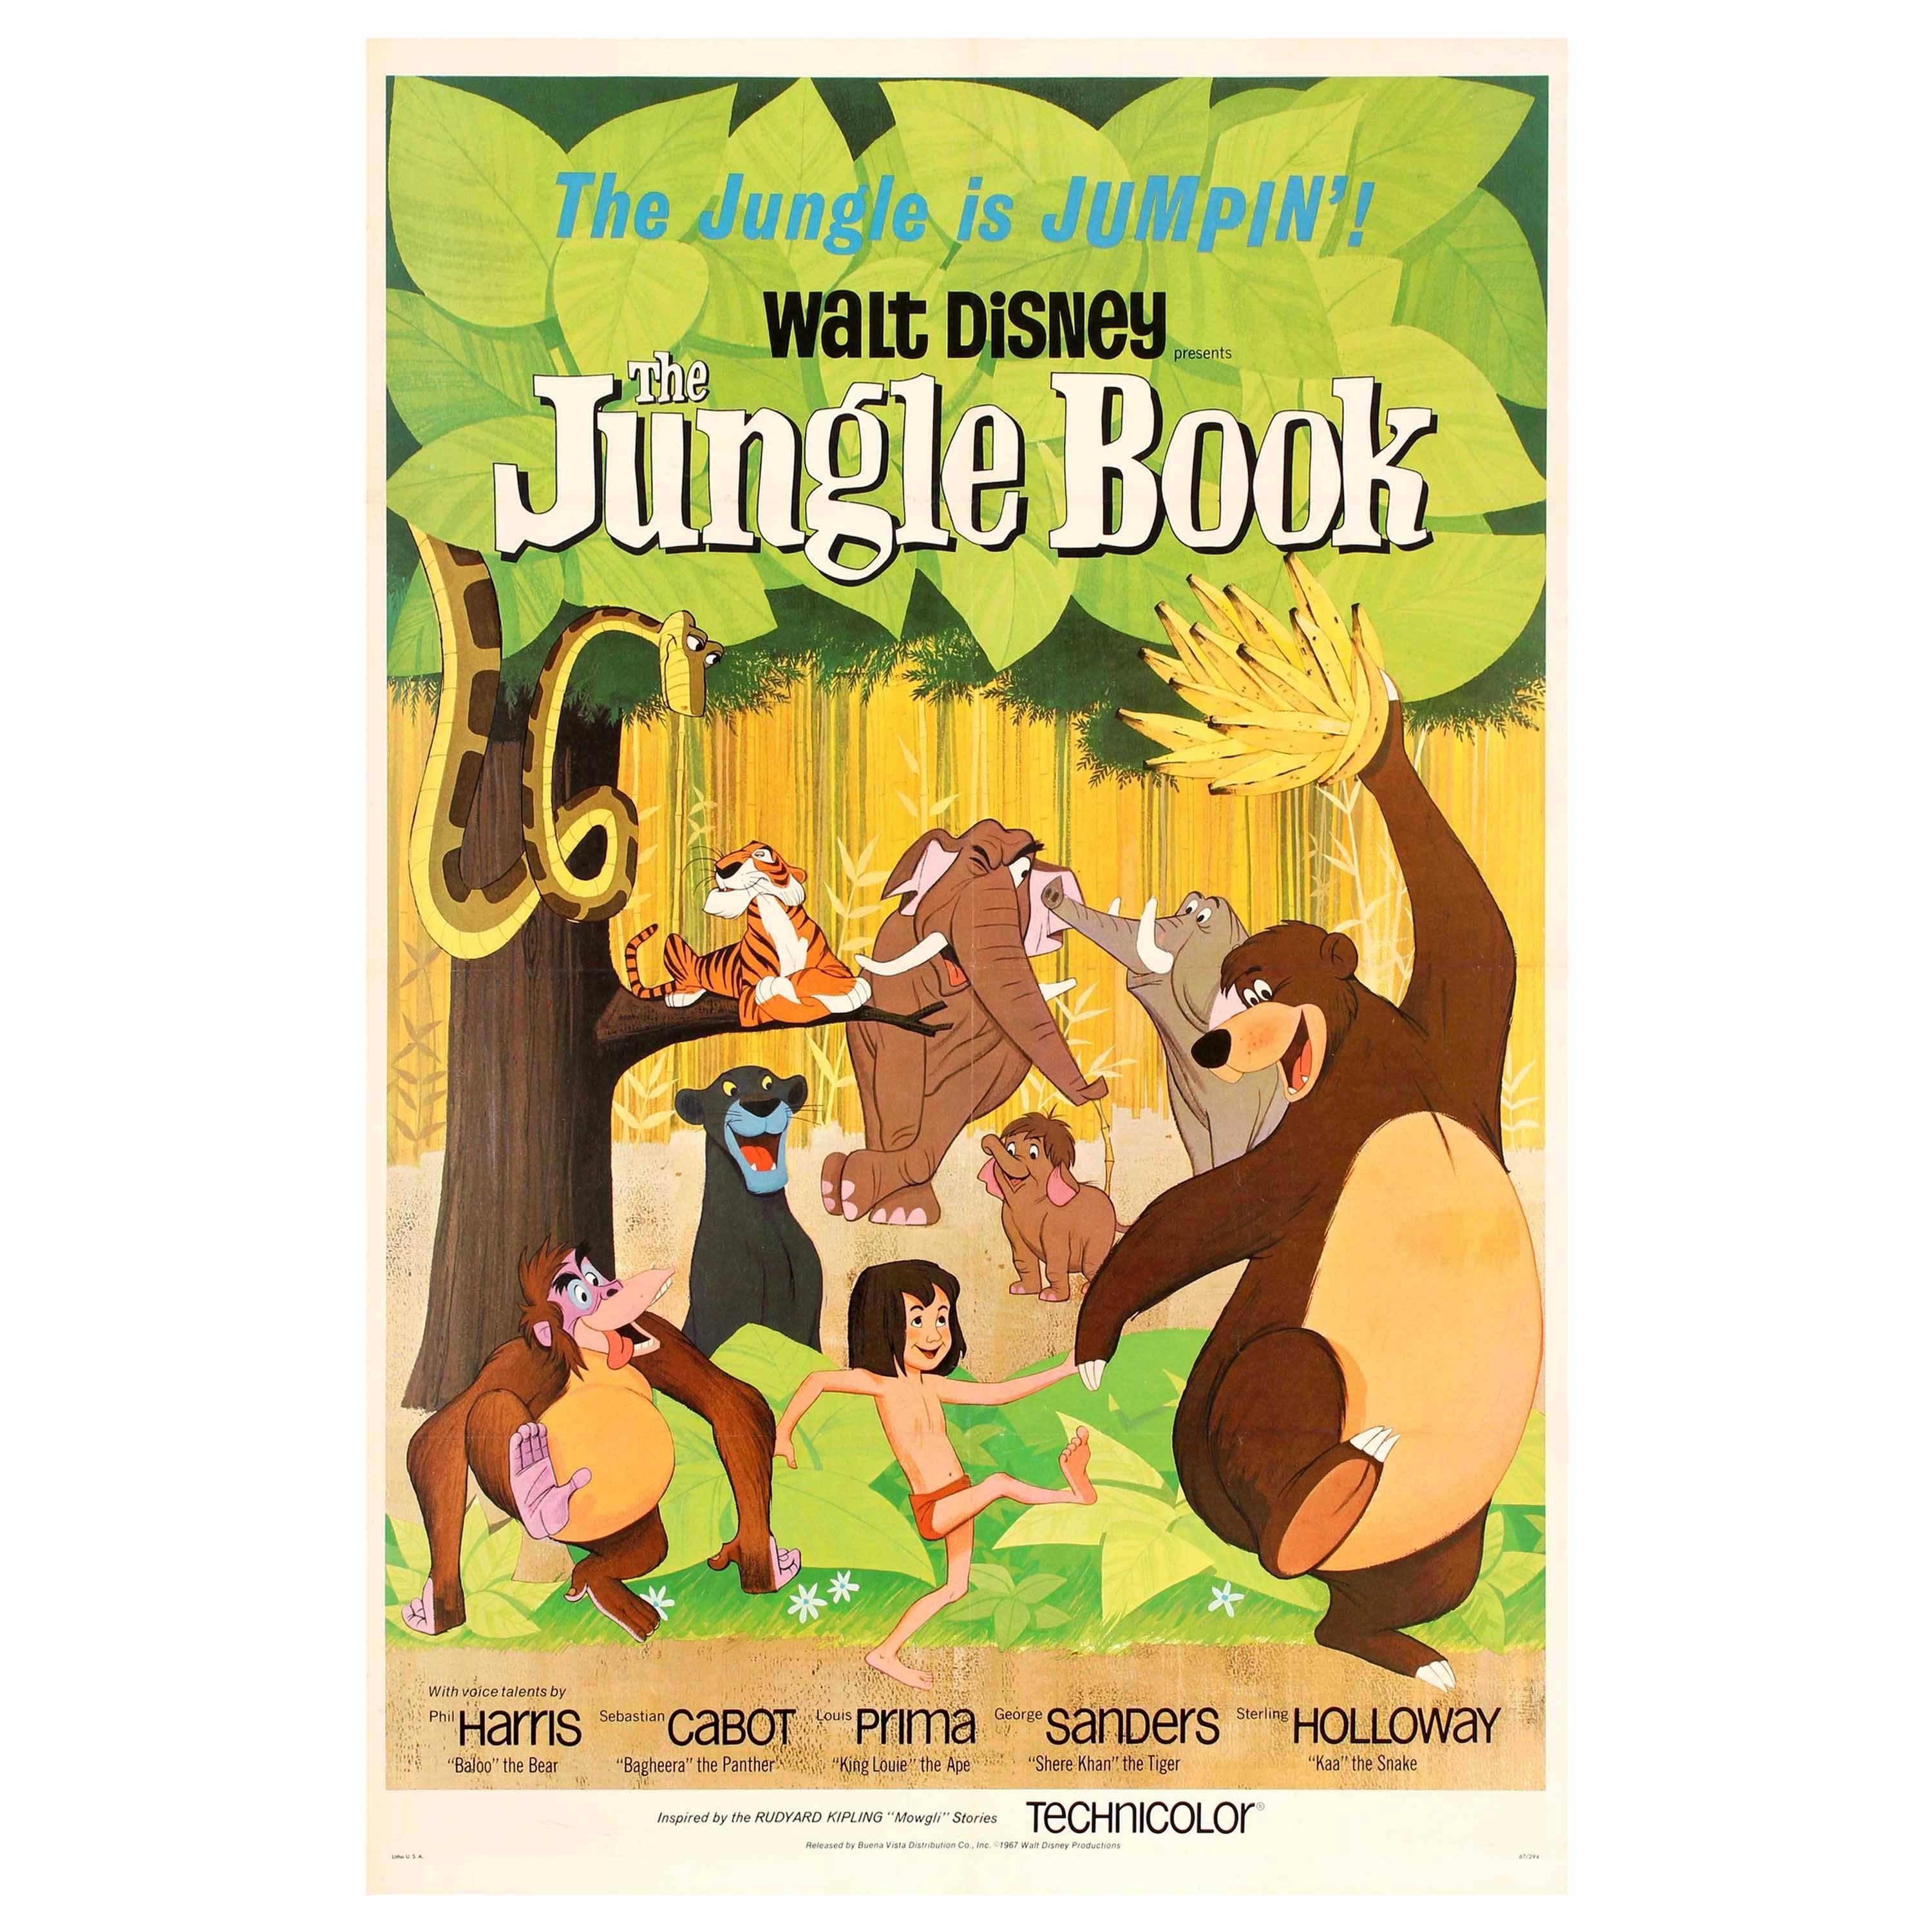 Original Vintage Walt Disney Movie Poster for The Family Classic The Jungle Book